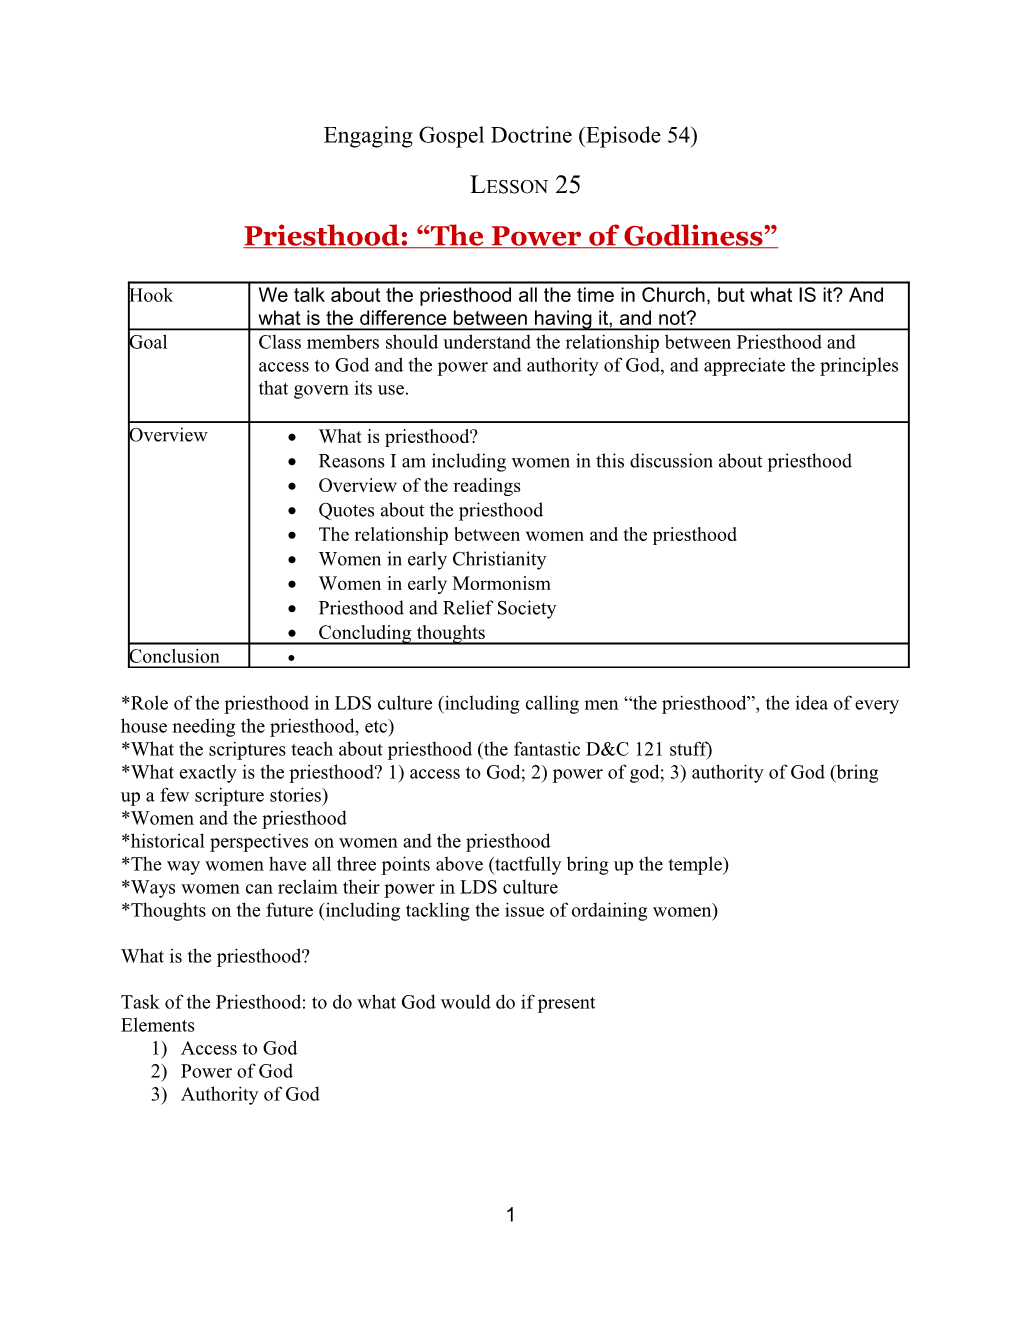 Priesthood: the Power of Godliness